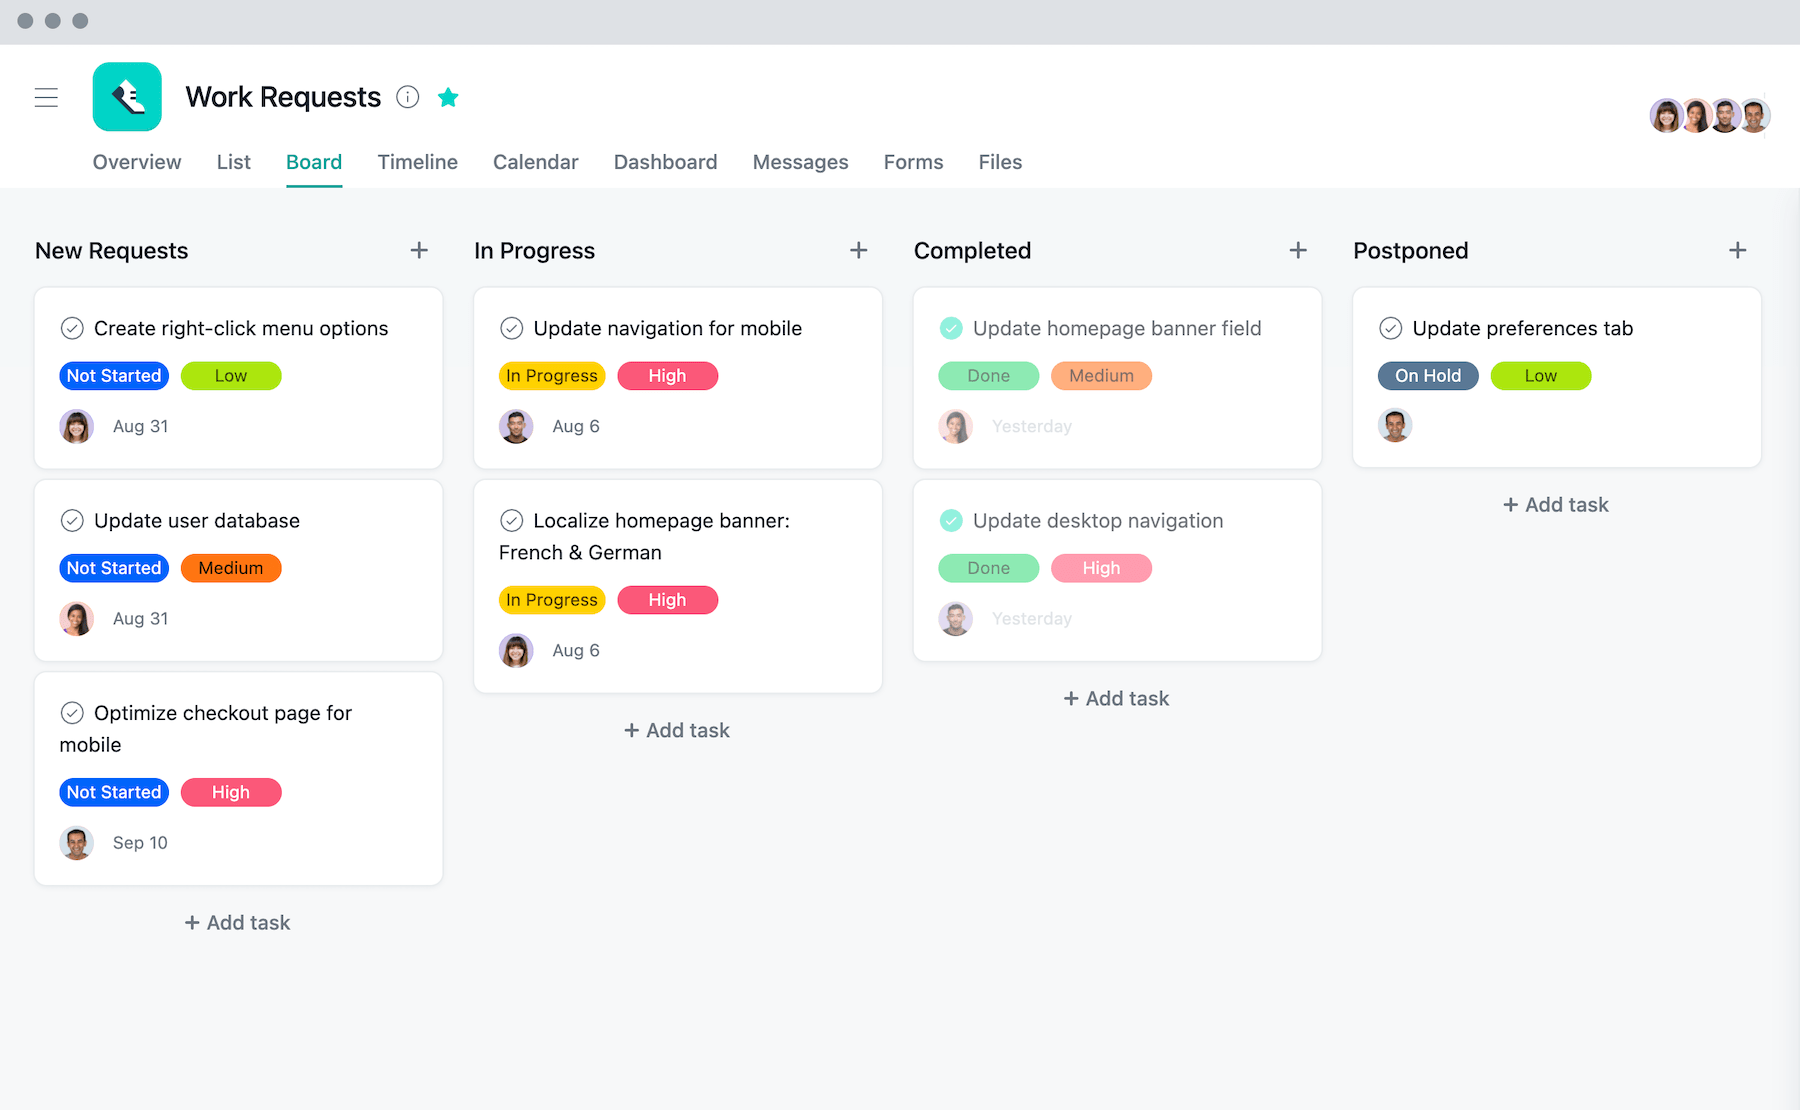 [Old Product UI] Work requests Kanban board example (Boards)